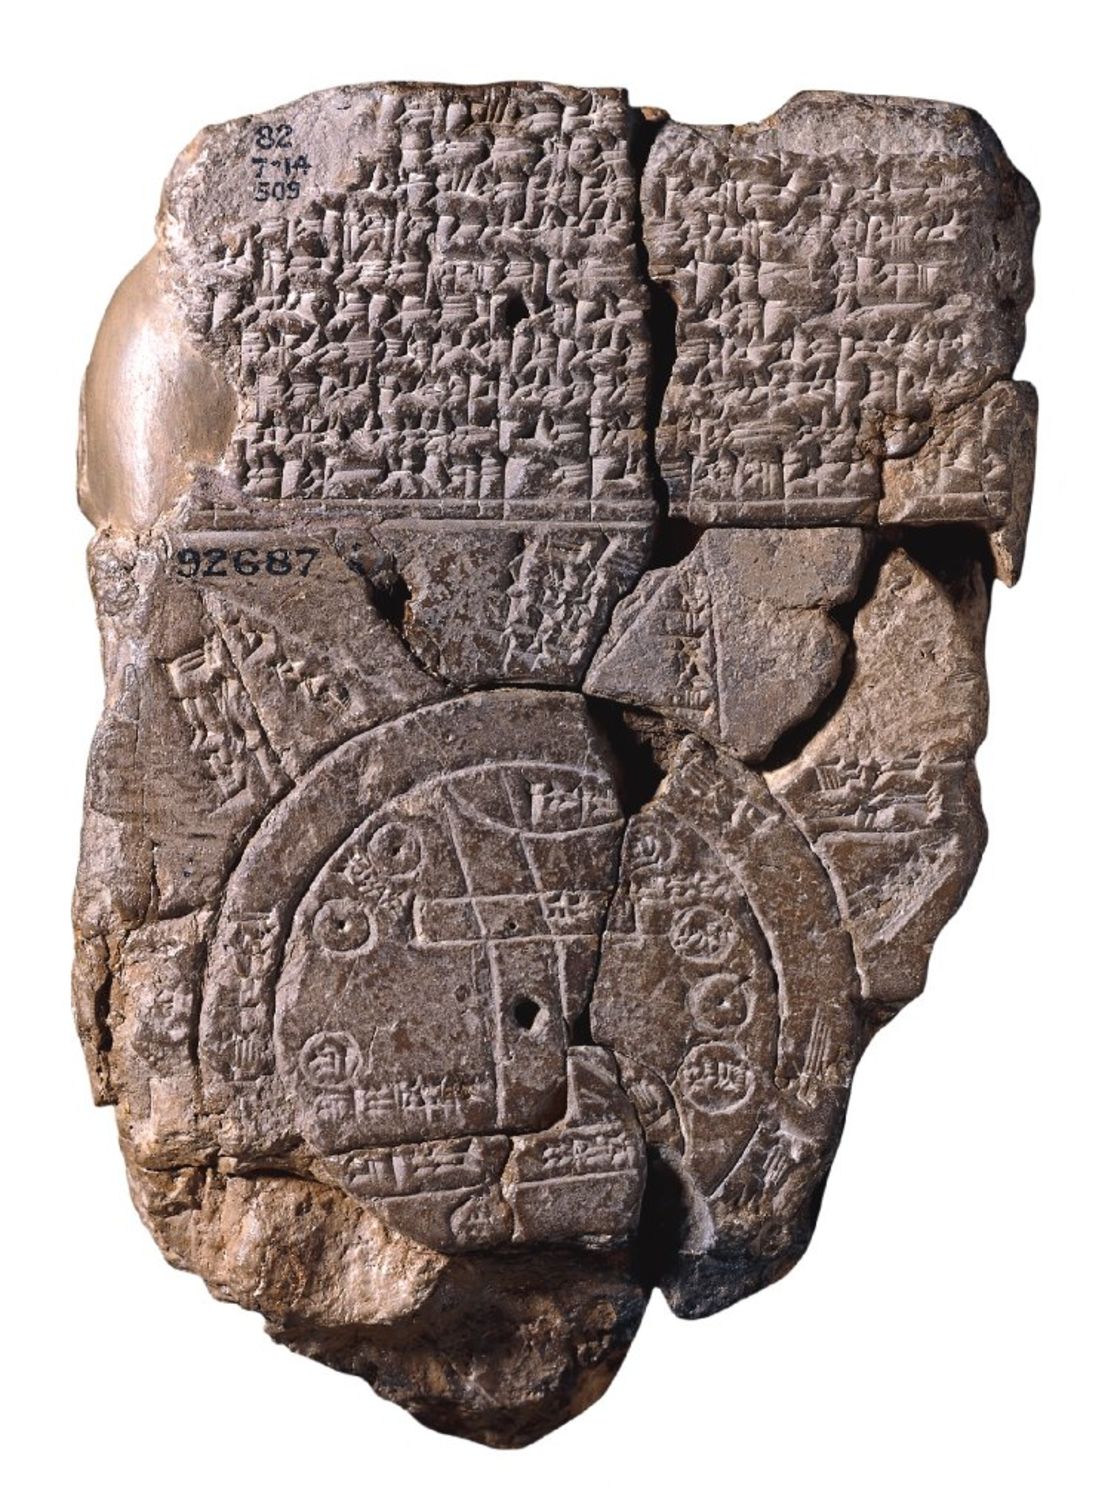 The "Babylonian Map of the World," a clay tablet created in Mesopotamia around 700 to 500 B.C., shows the known world ringed by a circular waterway labelled "Salt-Sea" and surrounded by eight triangular regions.